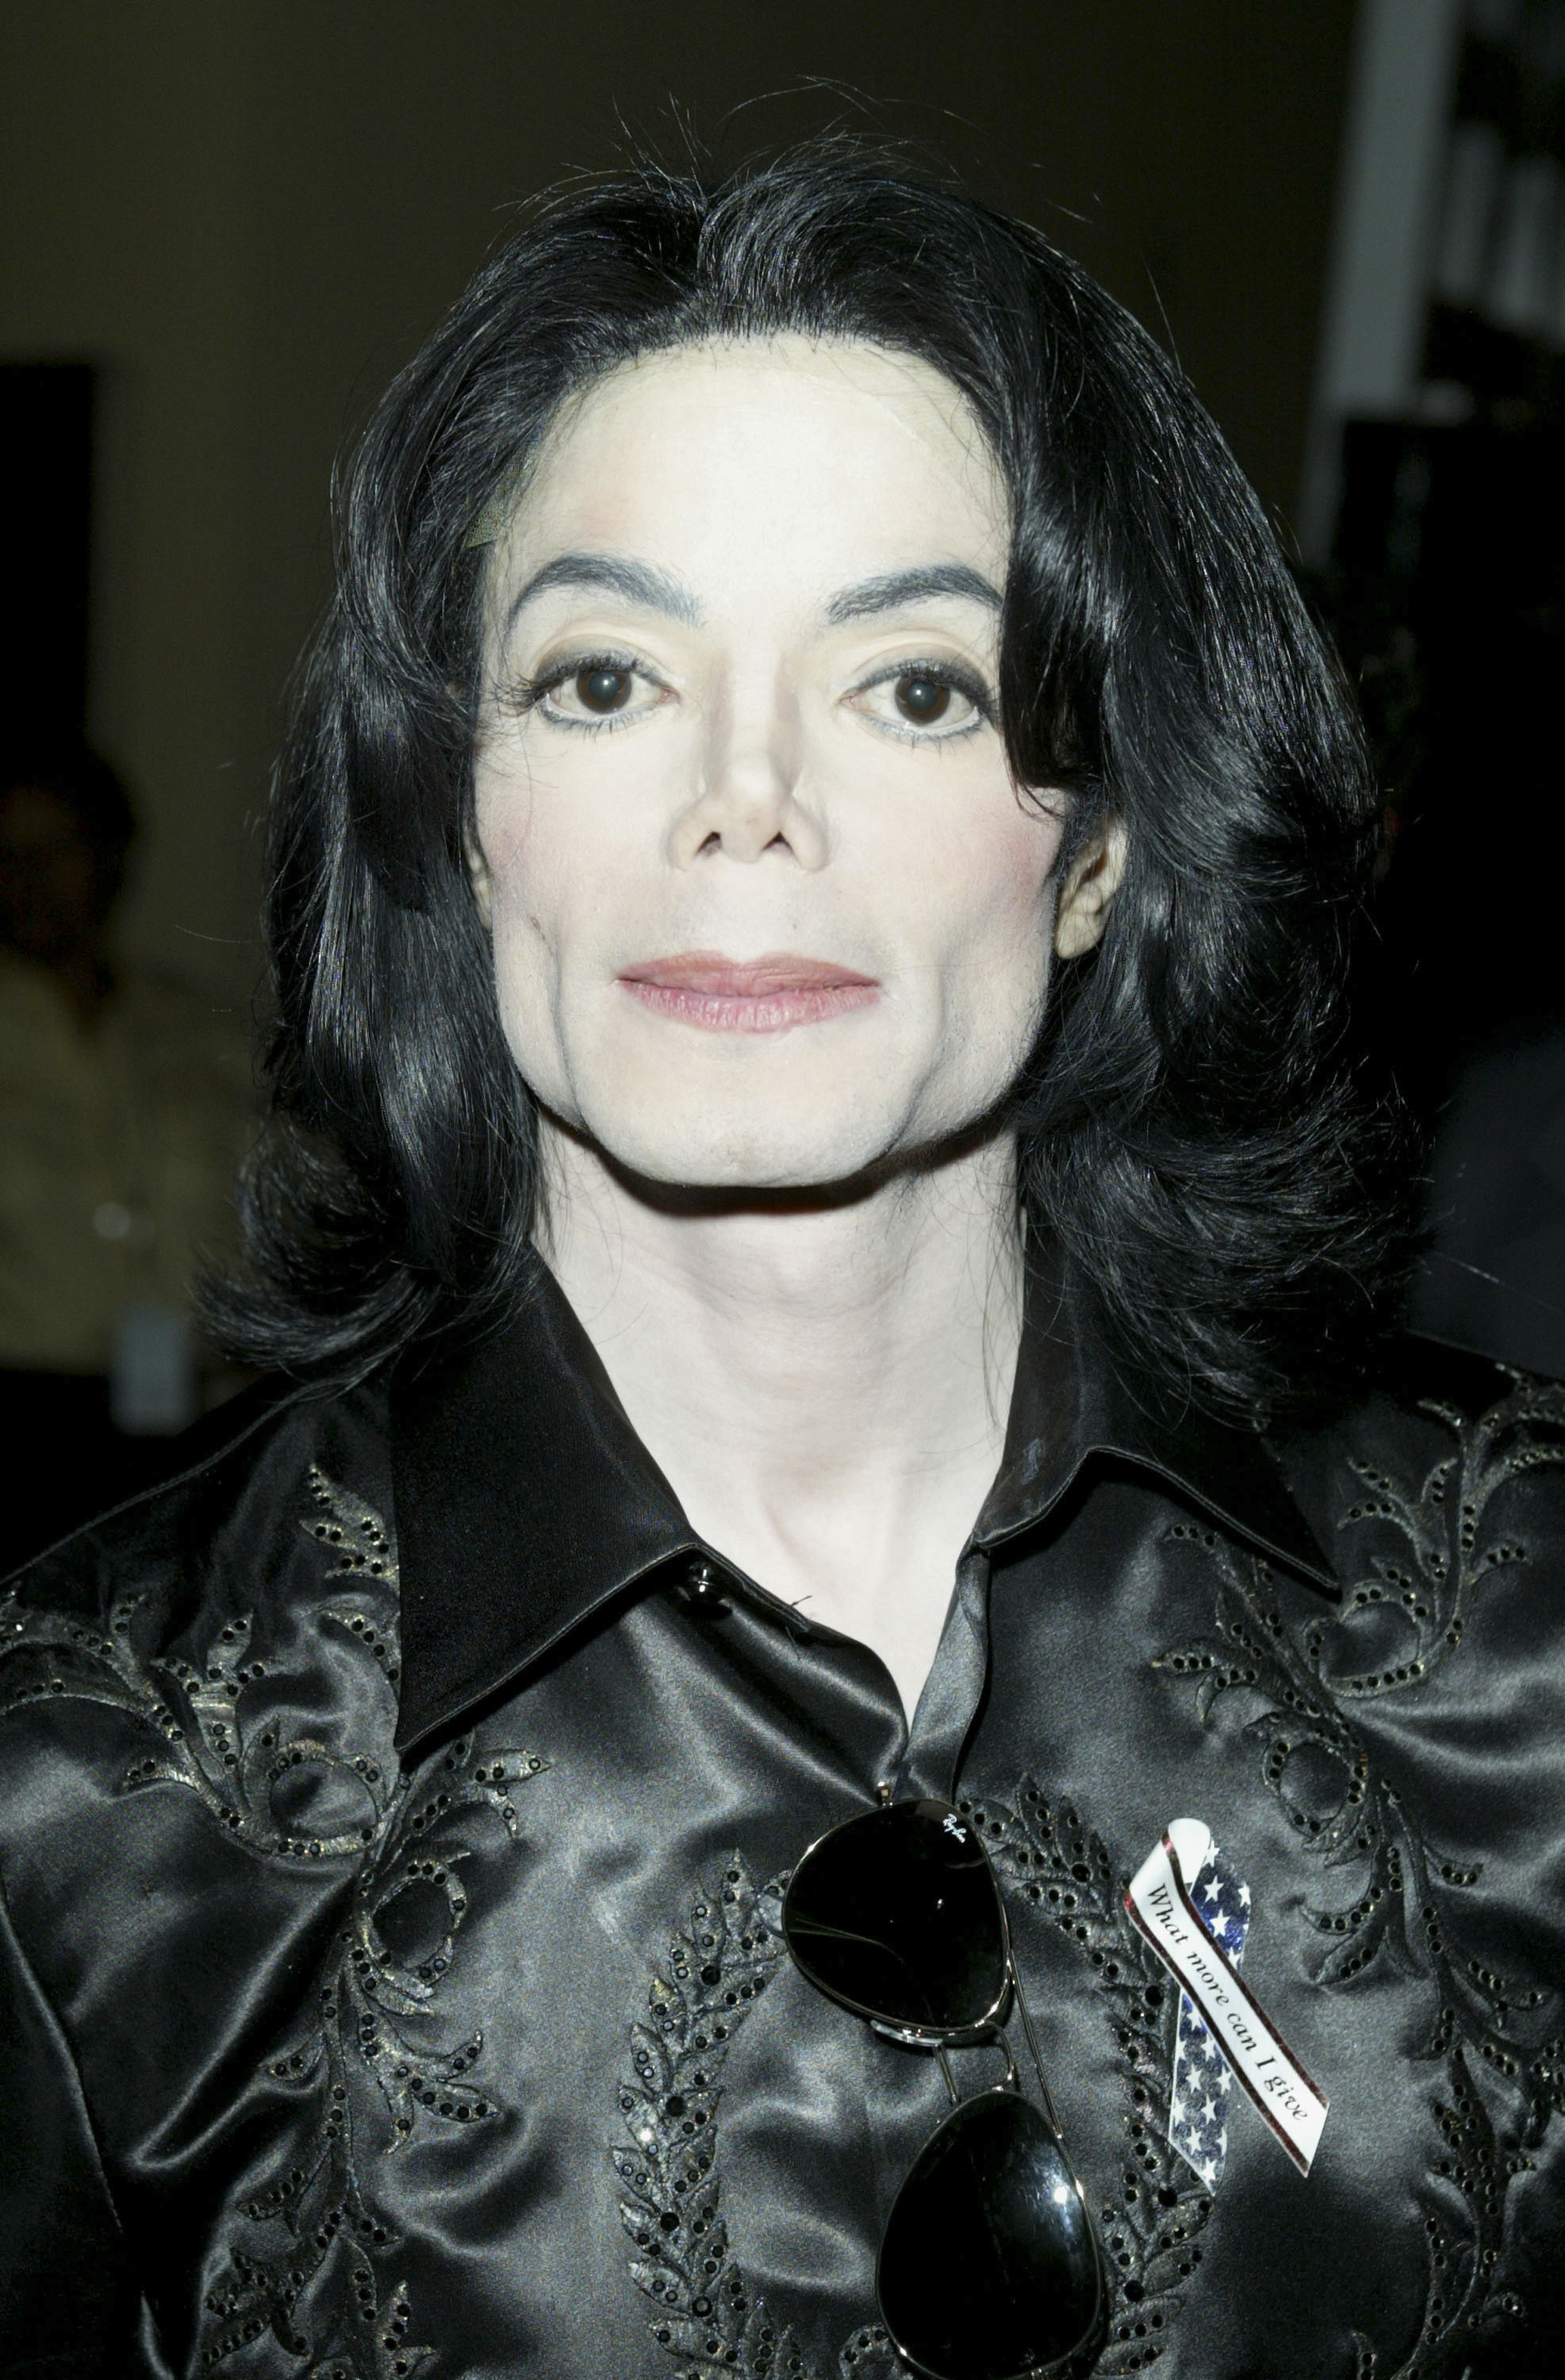 Michael Jackson in 2003 | Source: Getty Images